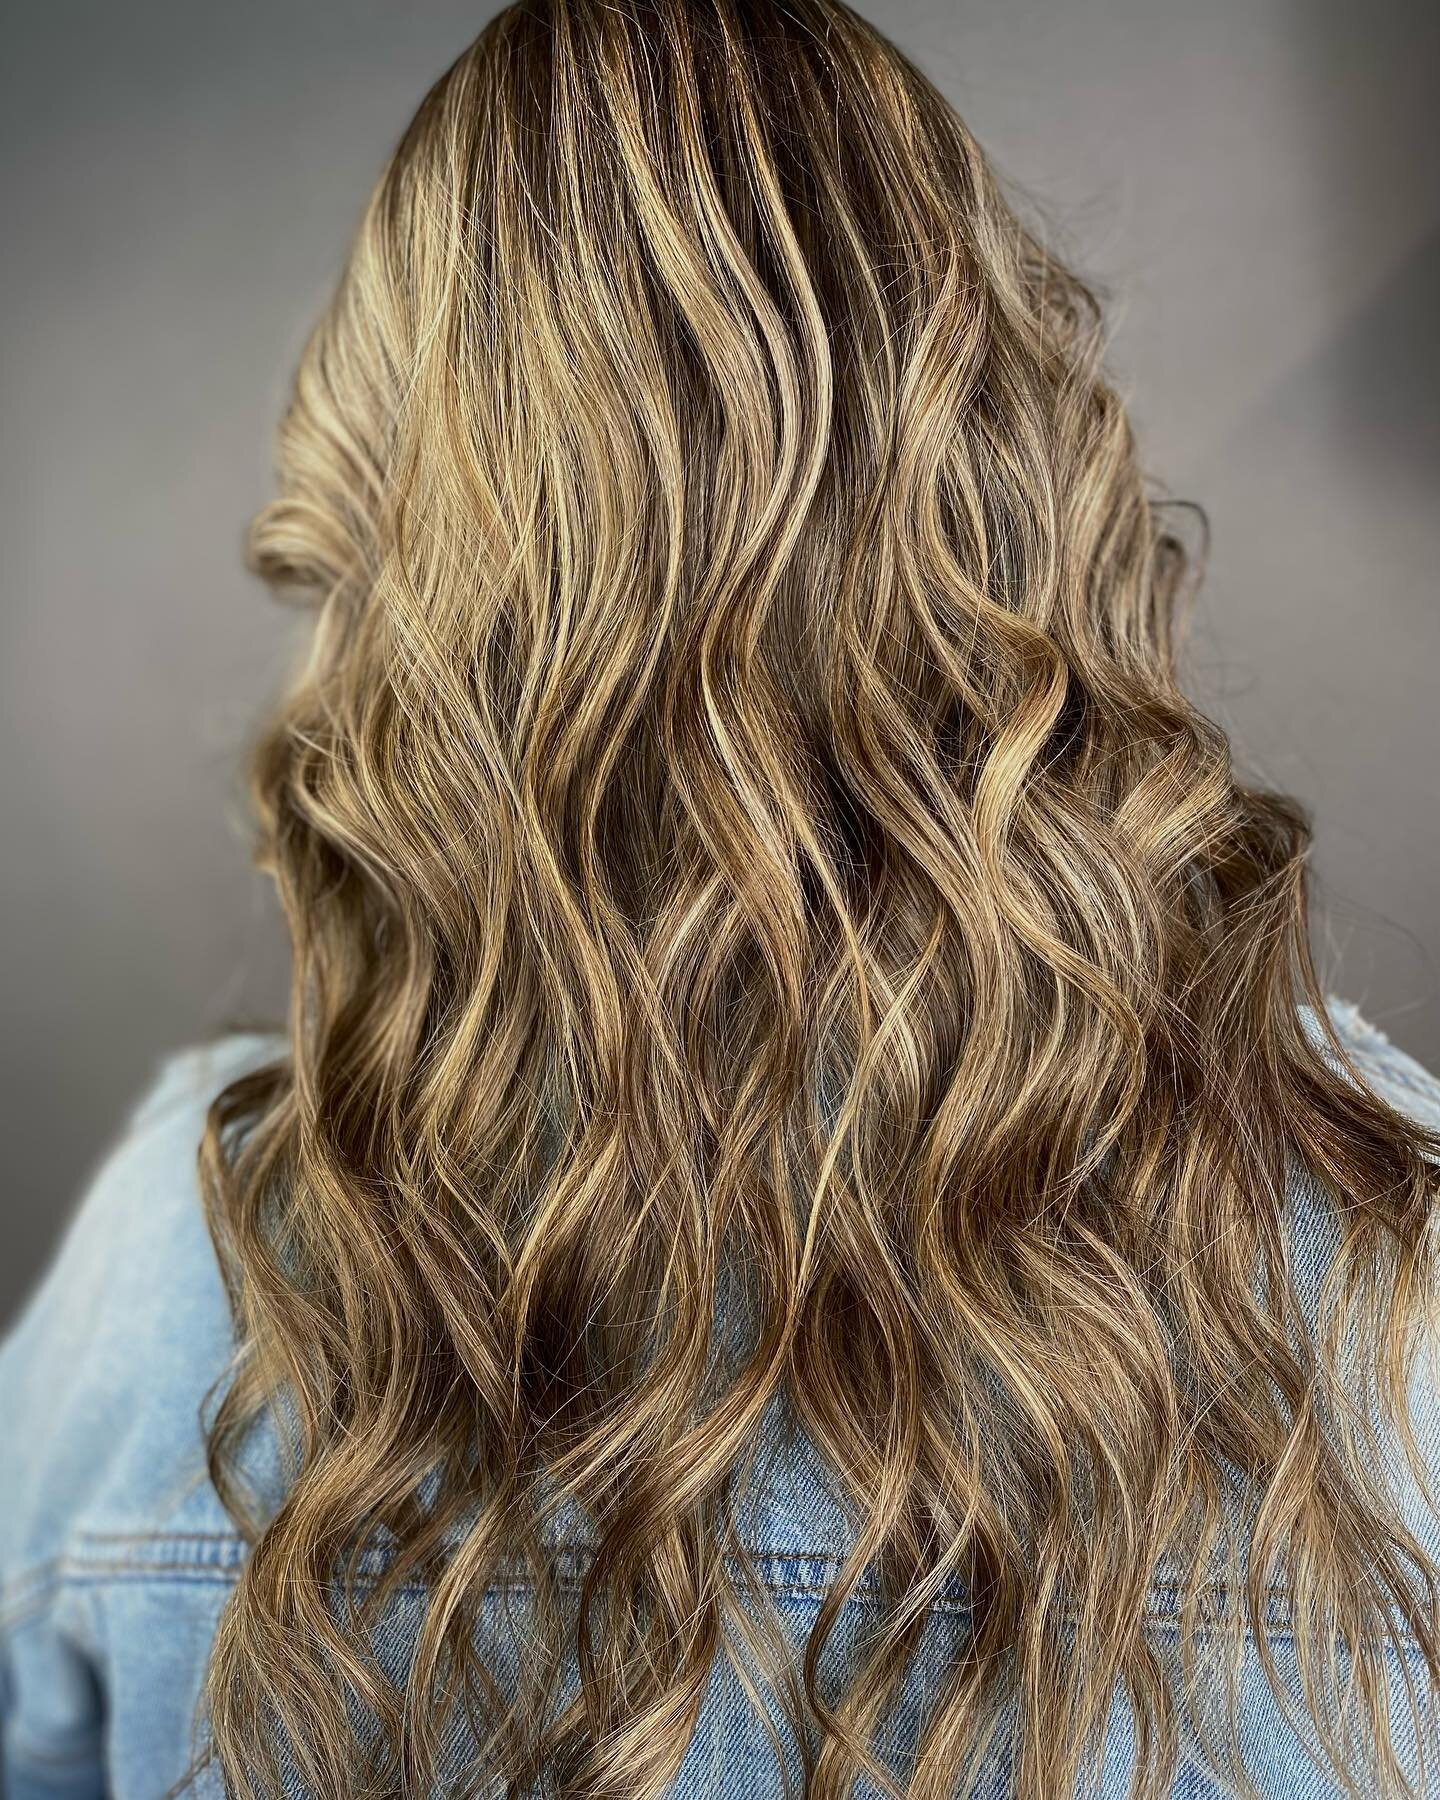 Welcome the first day of spring with gorgeous bronde highlights! As the sun shines brighter the hair gets lighter☀️